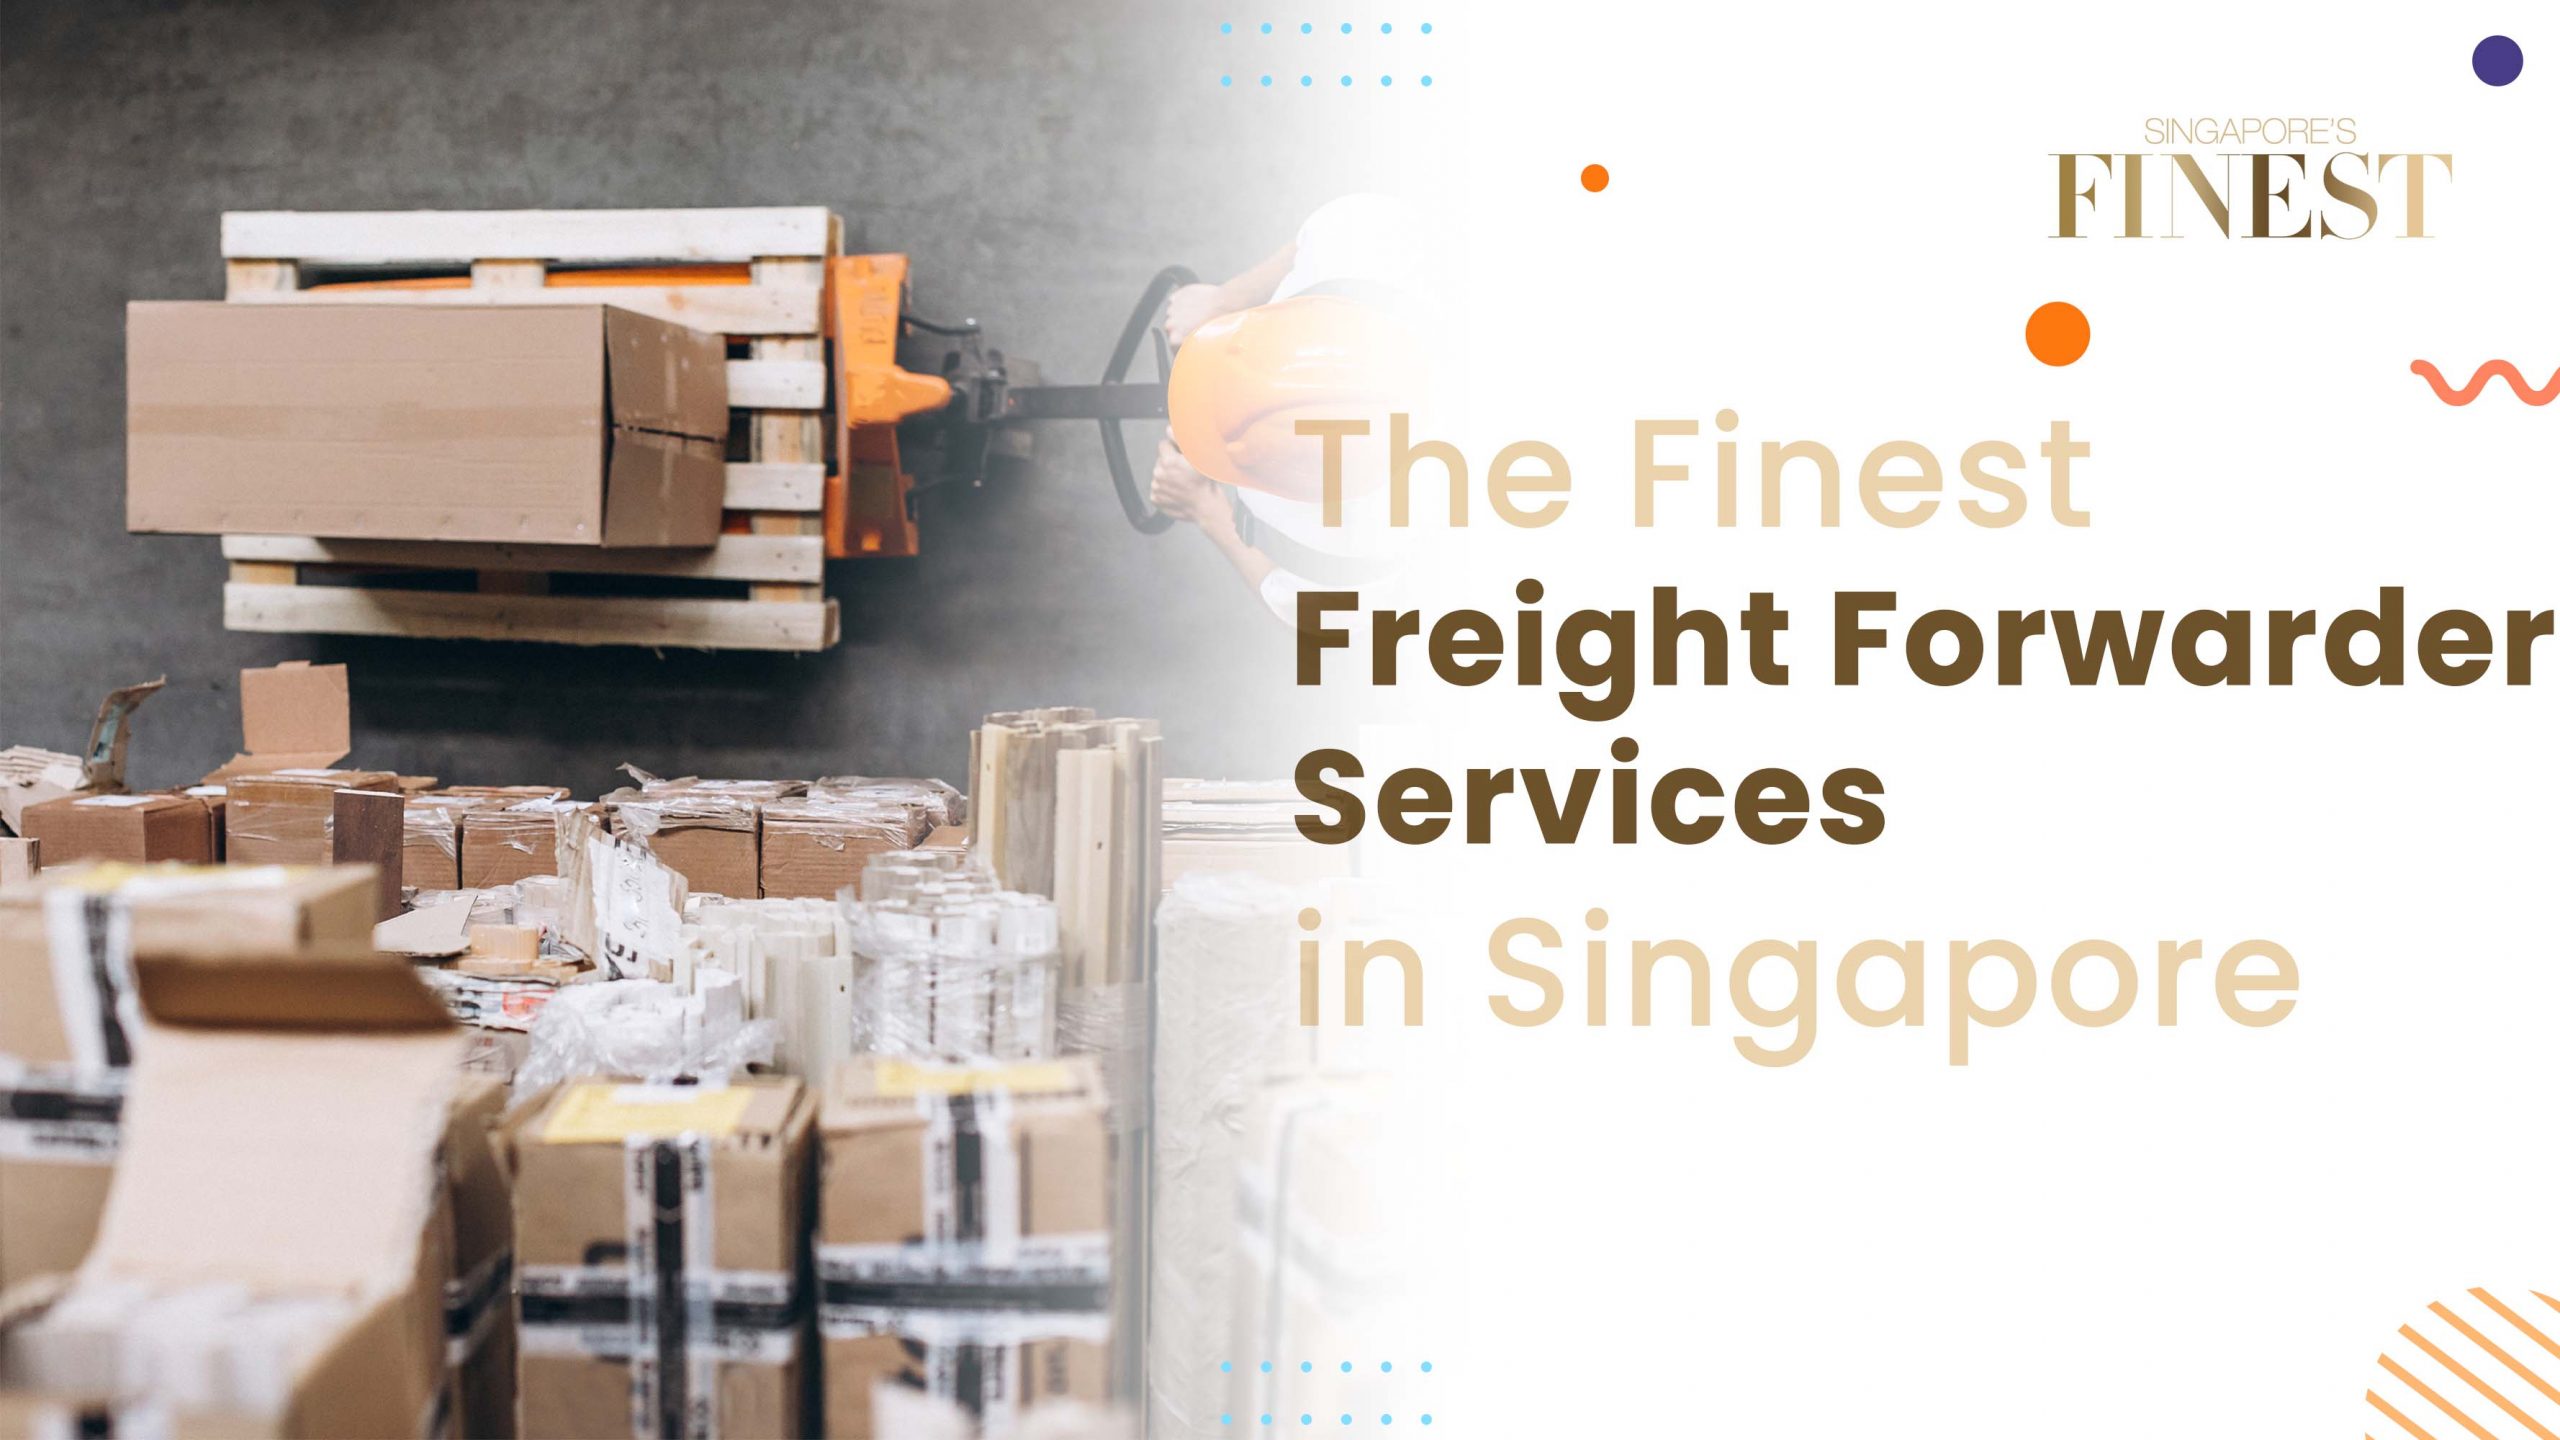 Finest Freight Forwarder Services in Singapore